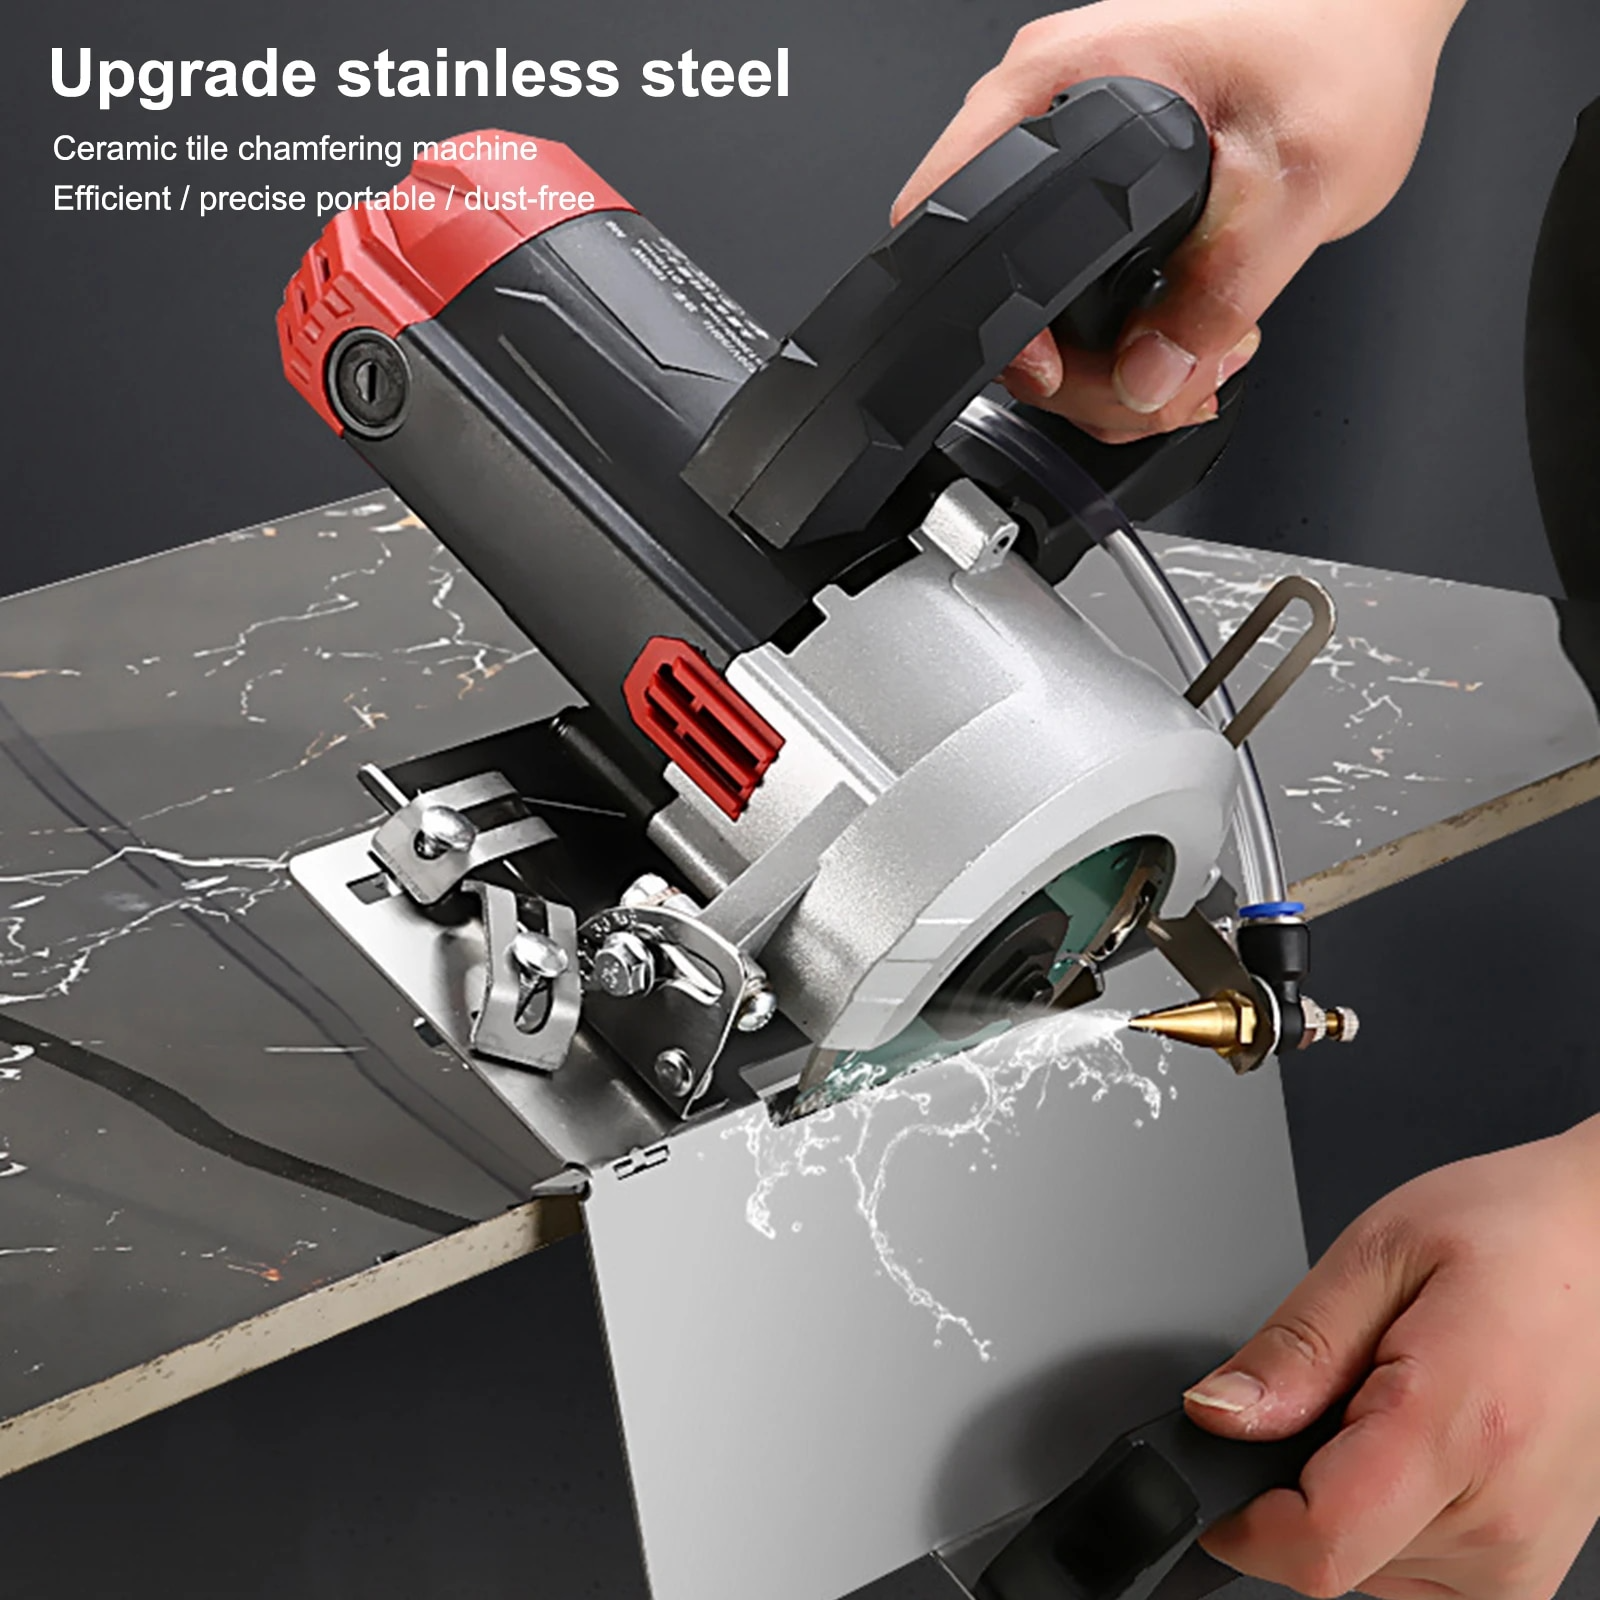 🔥Limited Time Sale 48% OFF🎉Stainless steel tile 45 º chamfering device-Buy 2 Get Free Shipping